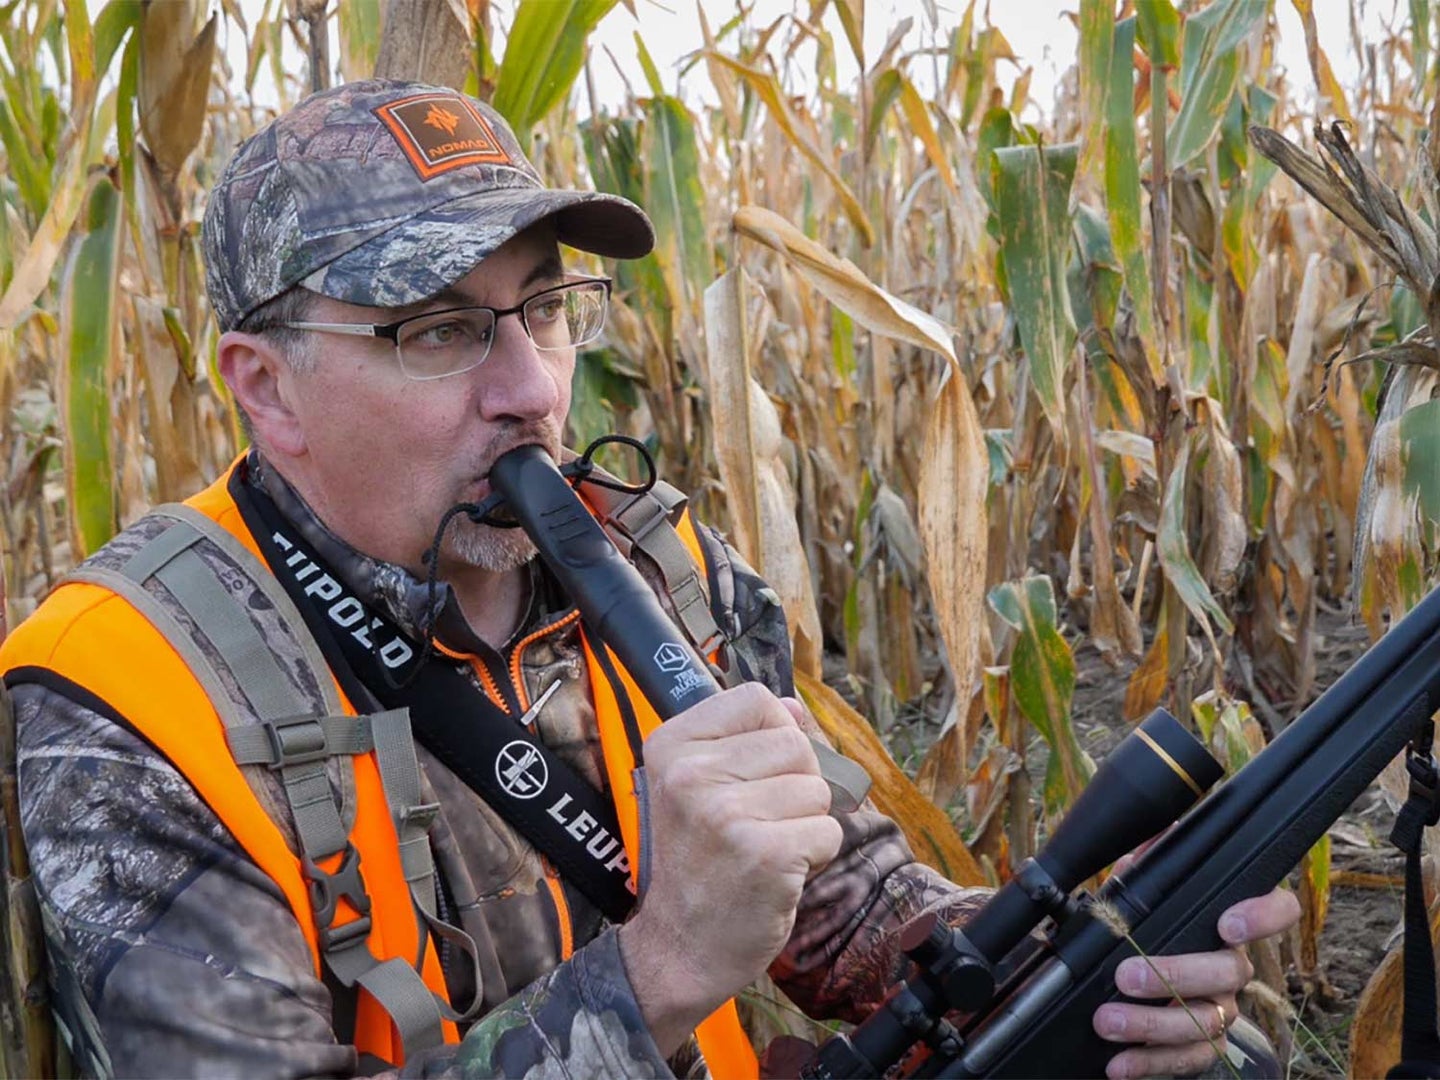 A hunter in camo and orange vest holds a rifle in one hand while blowing into a deer hunting grunt call held in the other.